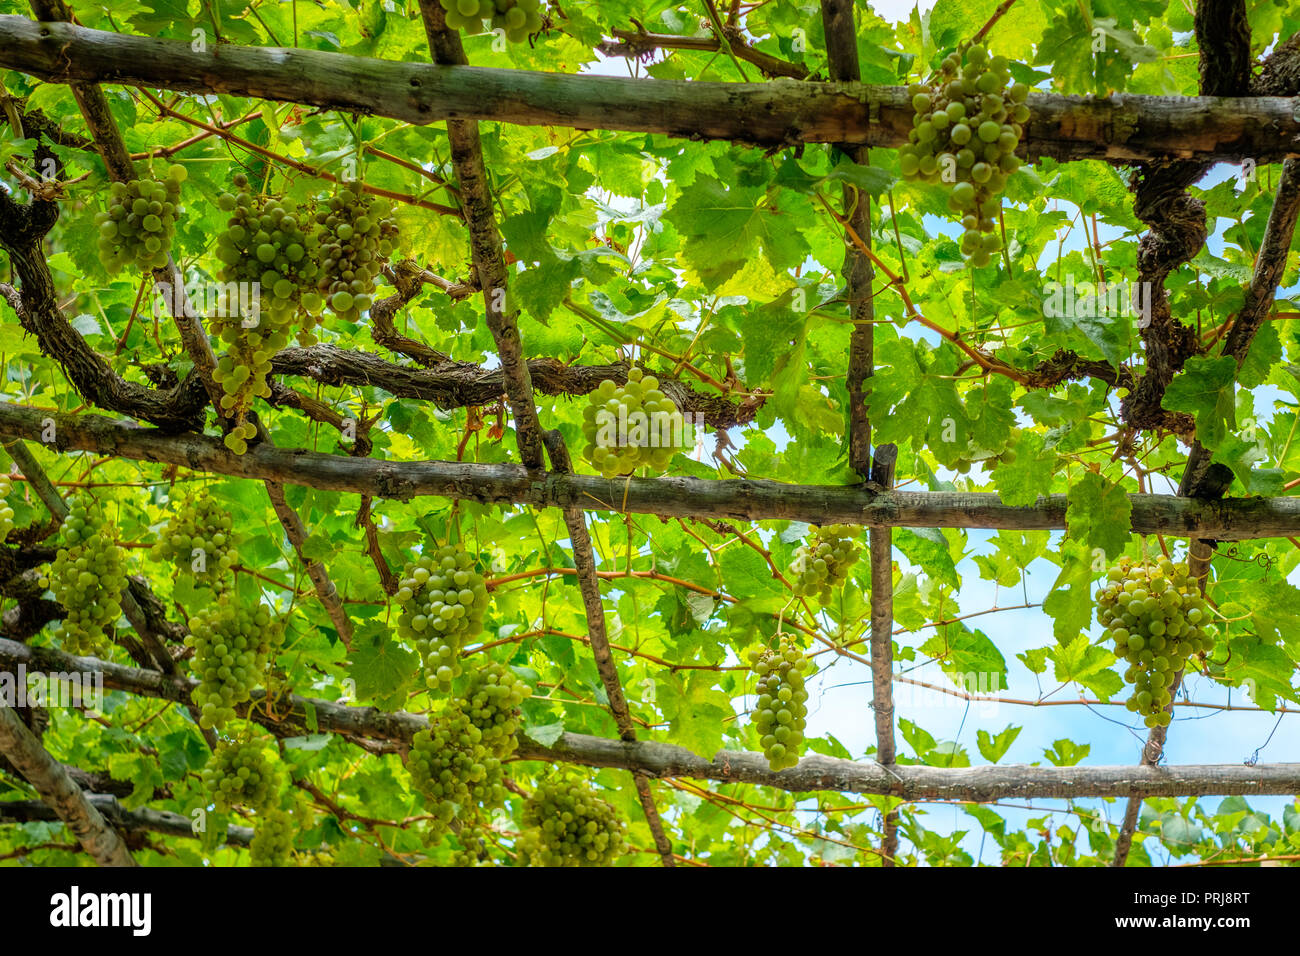 grapevine hanging -   grapes on vine on wooden beams Stock Photo